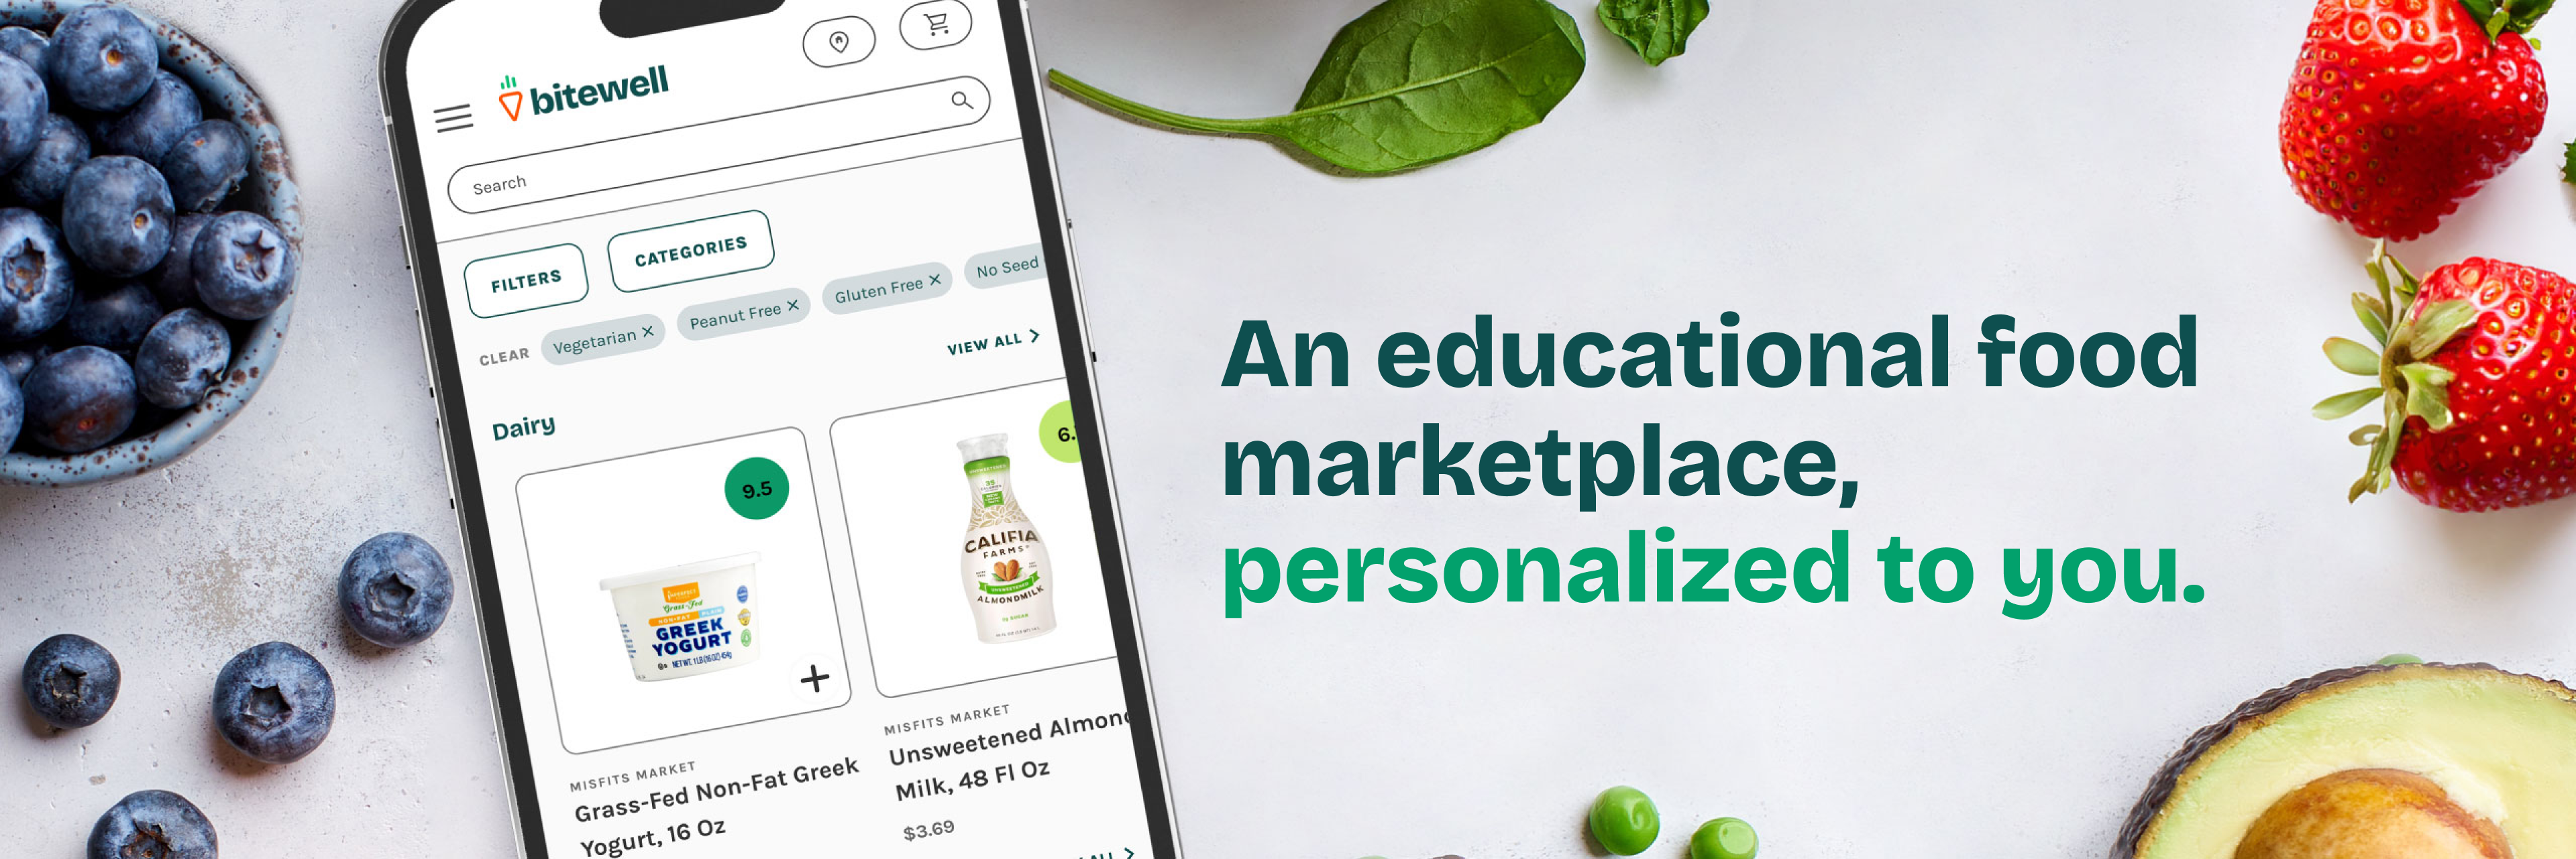 An educational marketplace personalized to you.